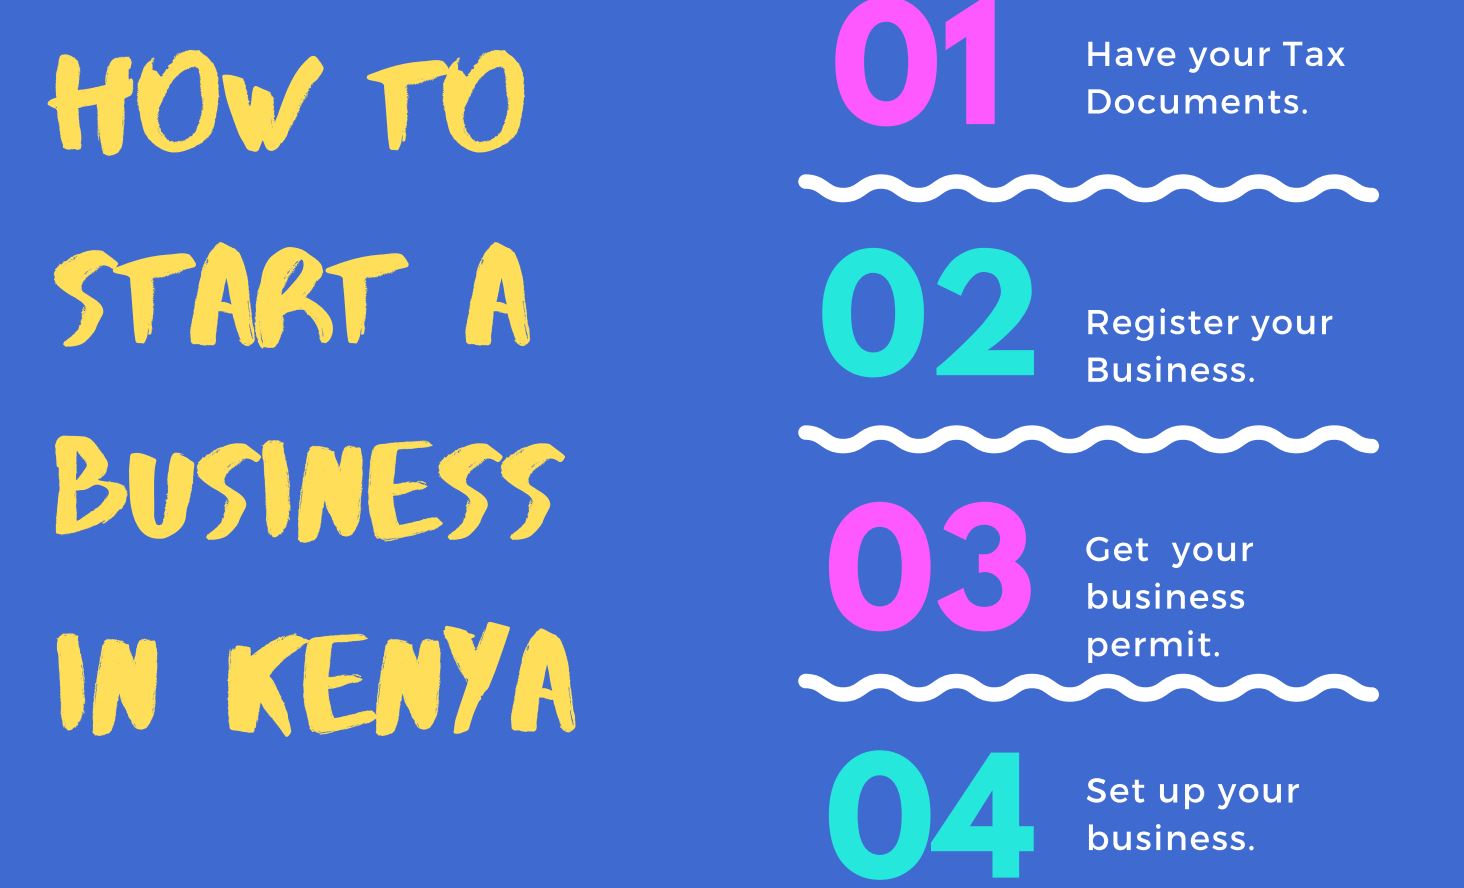 Some of the Legal Requirements of Starting a Business in Kenya and Licenses required